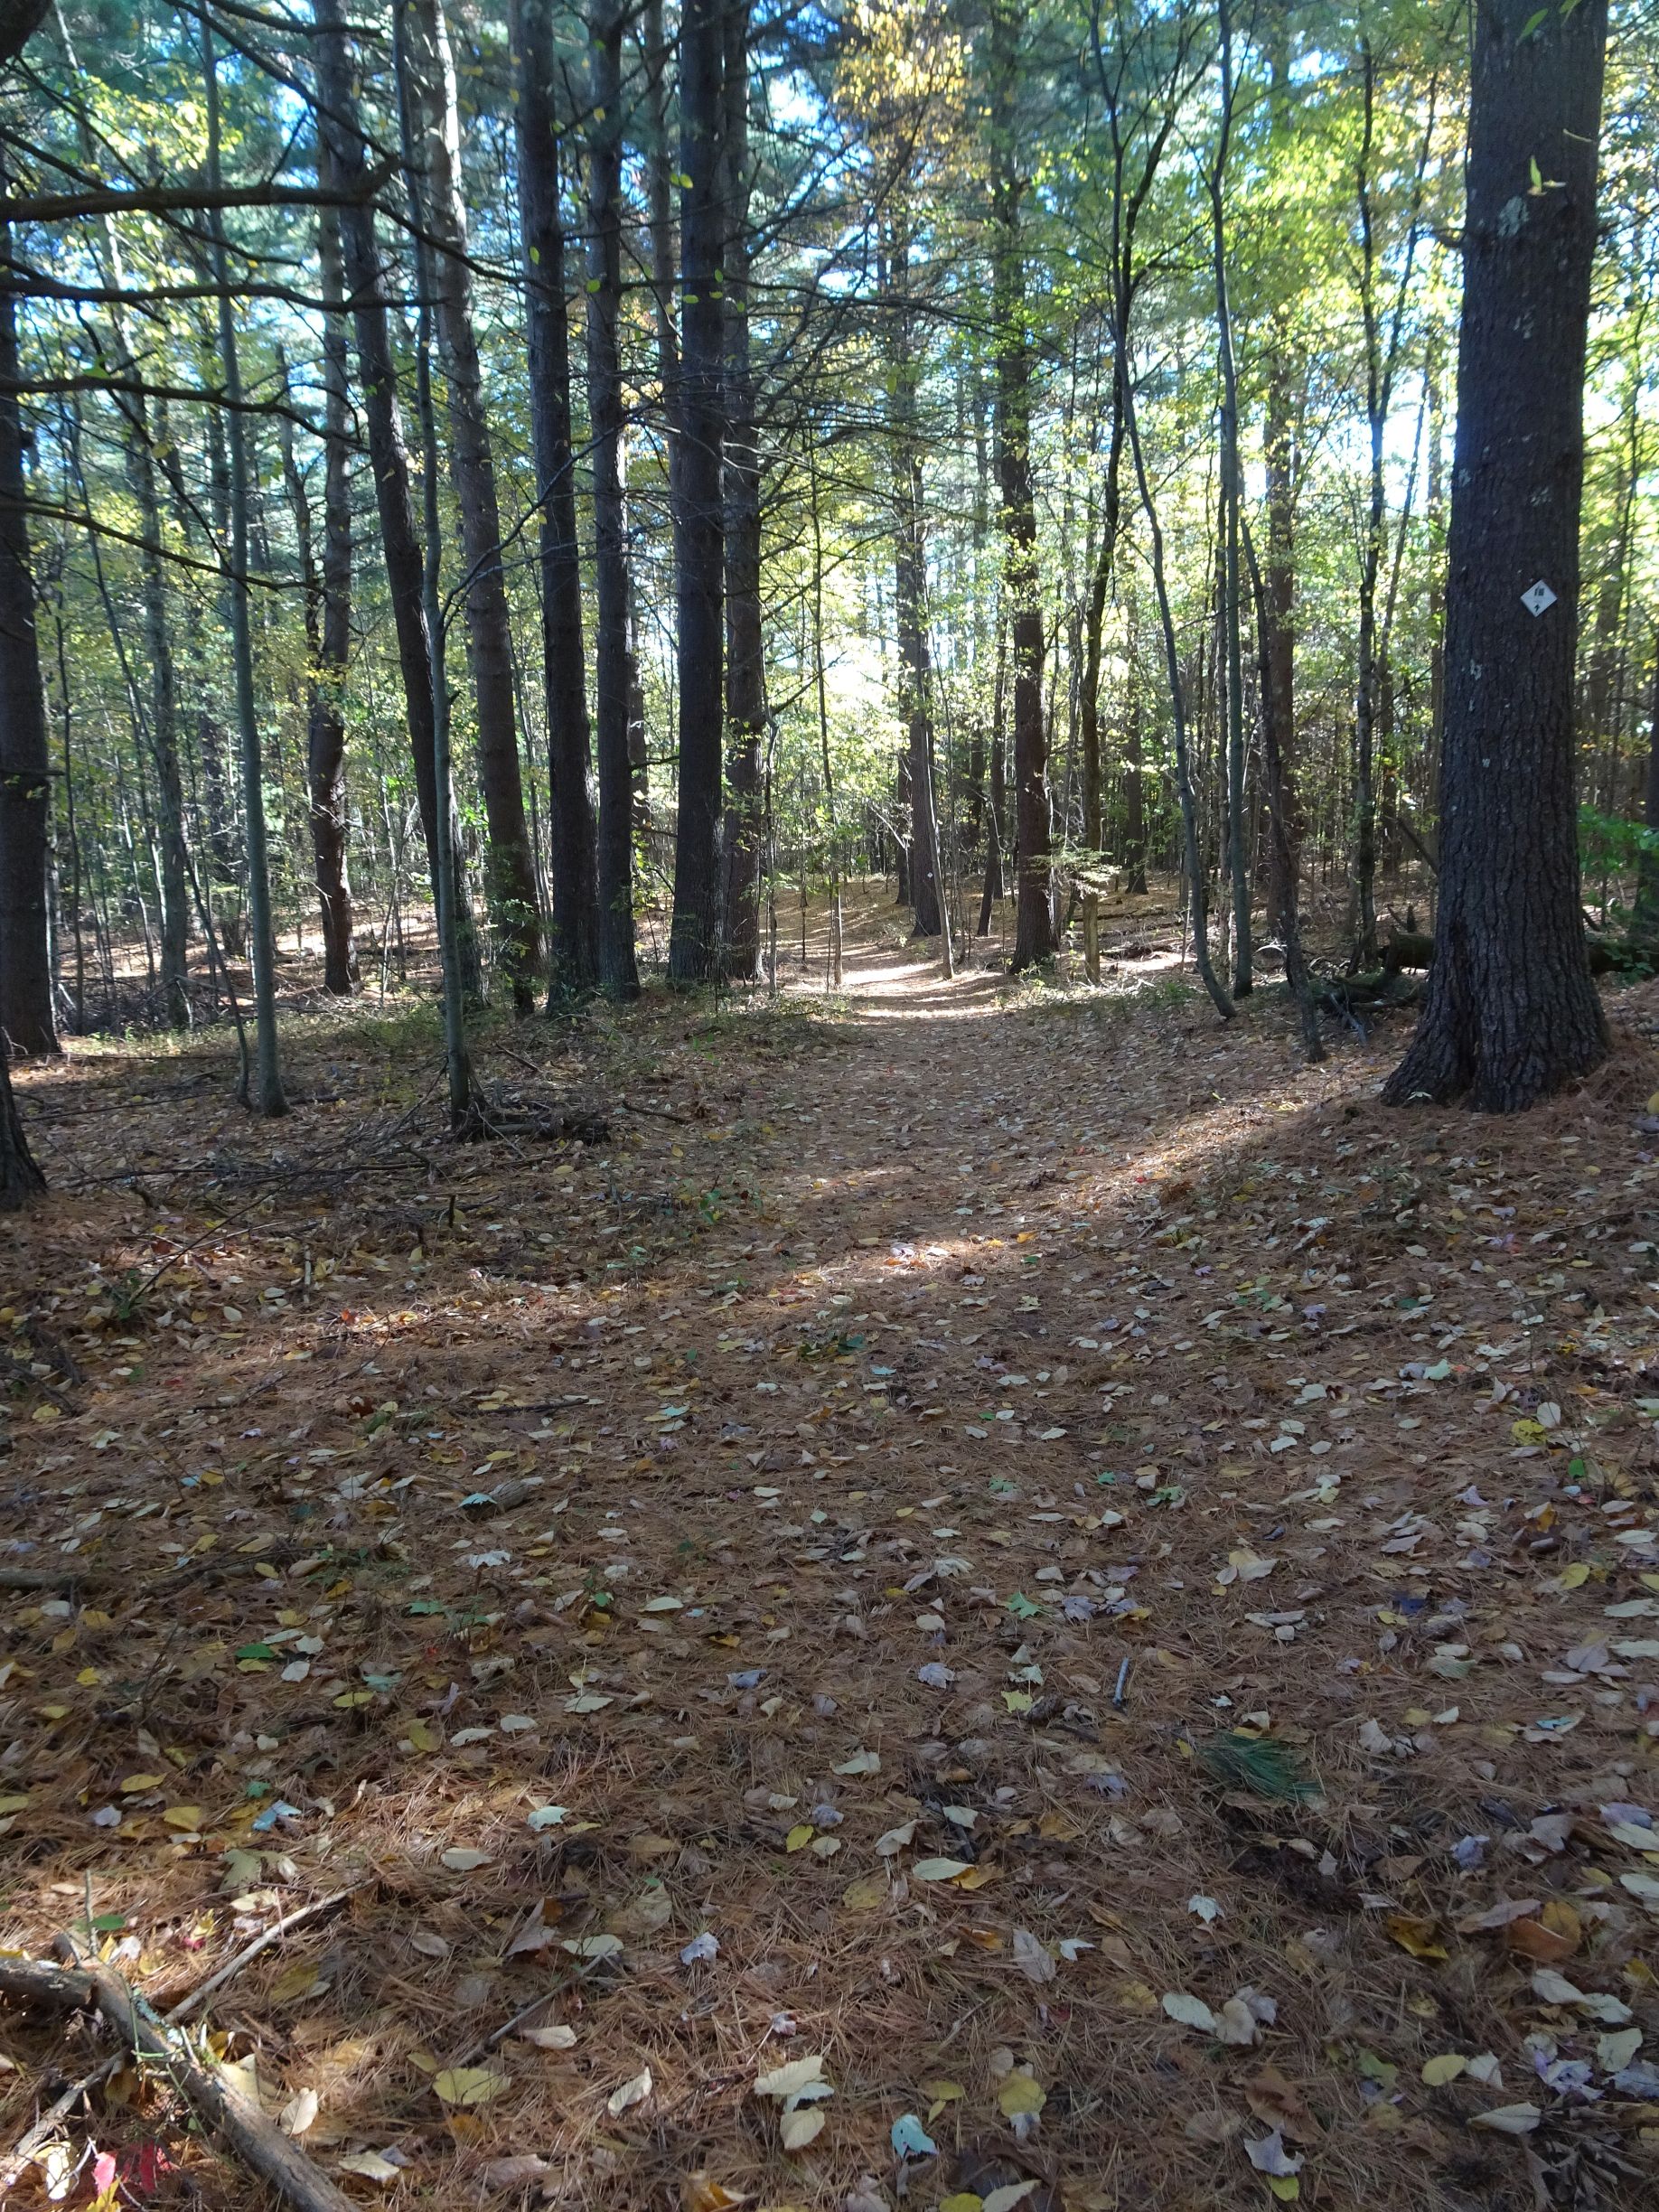 Wide open woodland path covered with pine needles